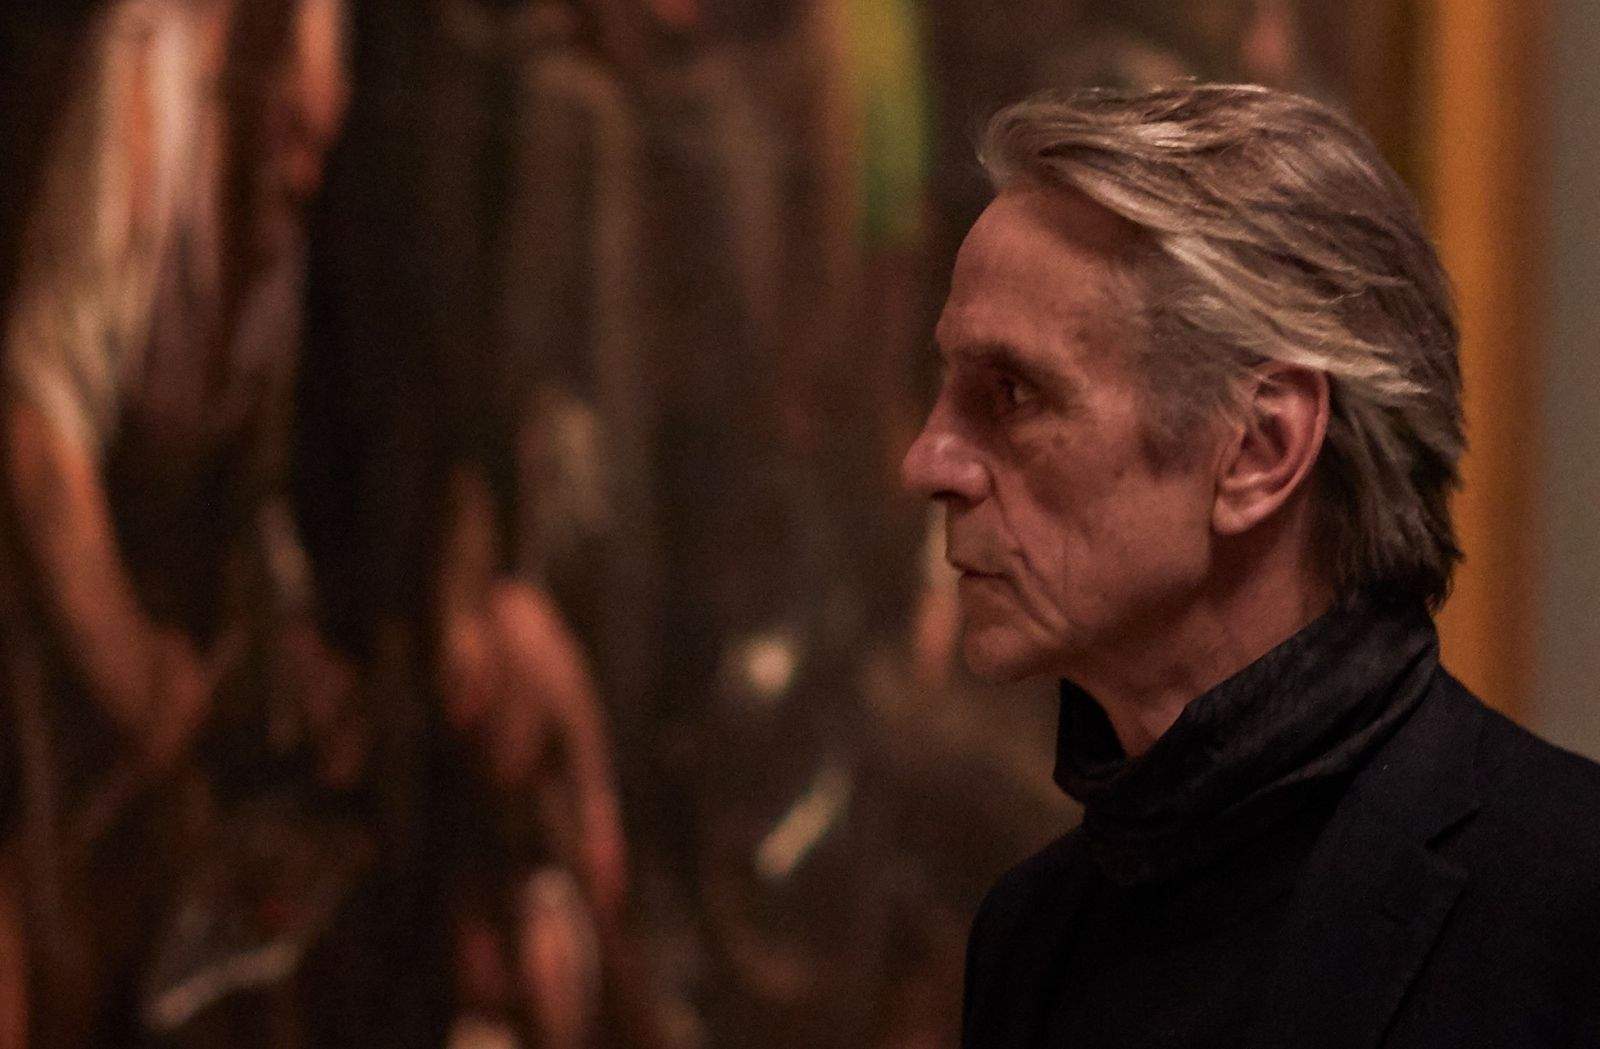 Jeremy Irons will star in an upcoming documentary about the Egyptian Museum